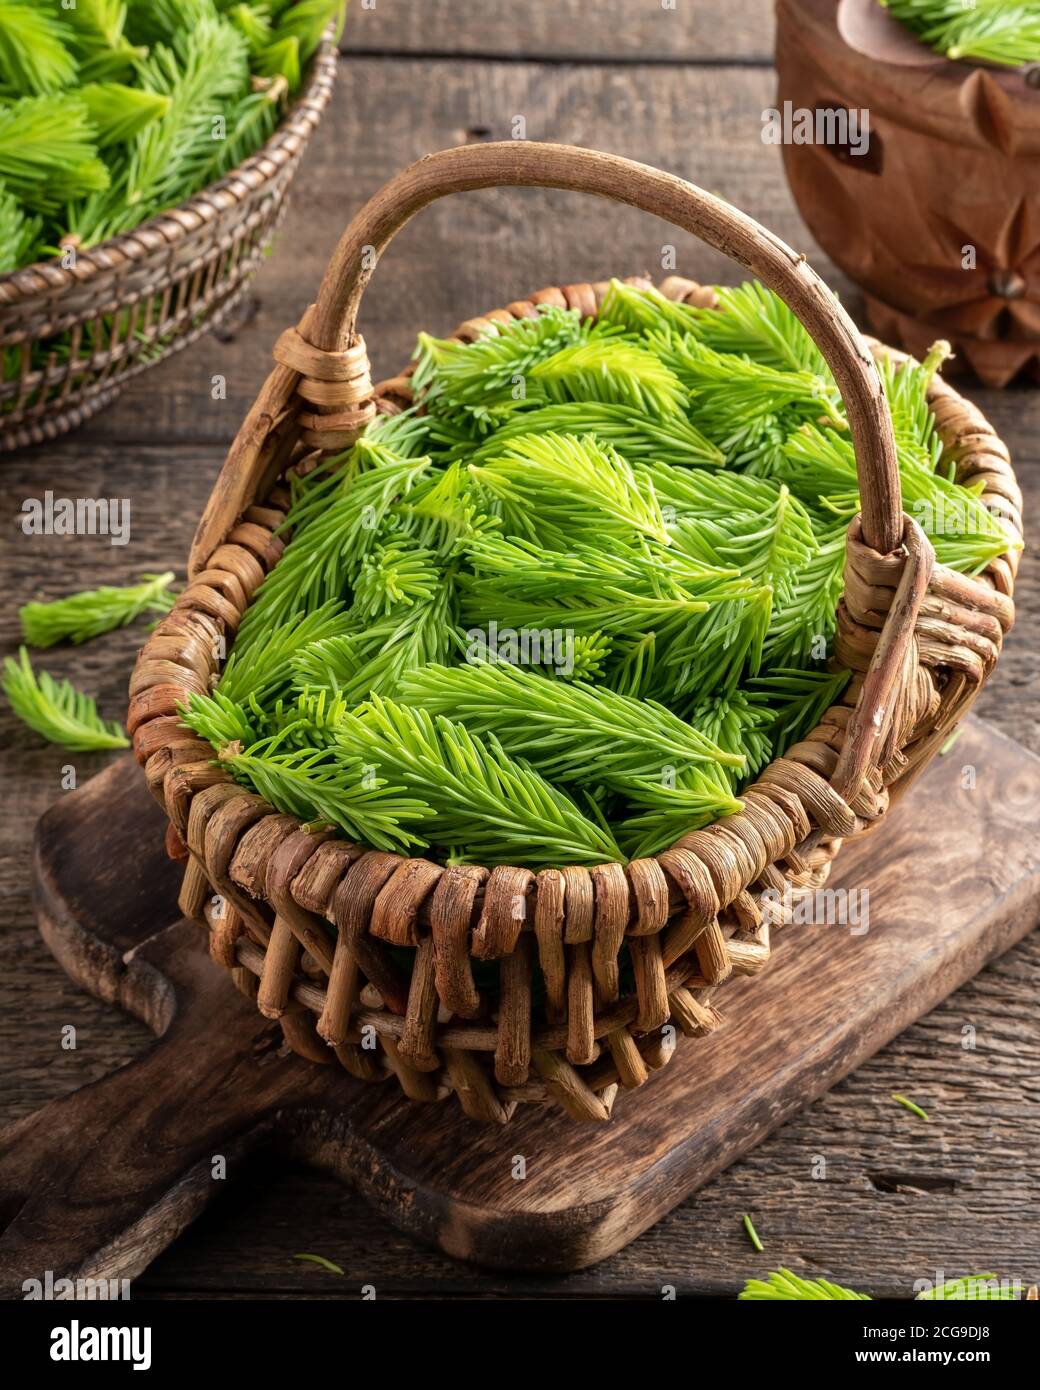 Young spruce tips in a basket, collected to prepare homemade herbal syrup Stock Photo